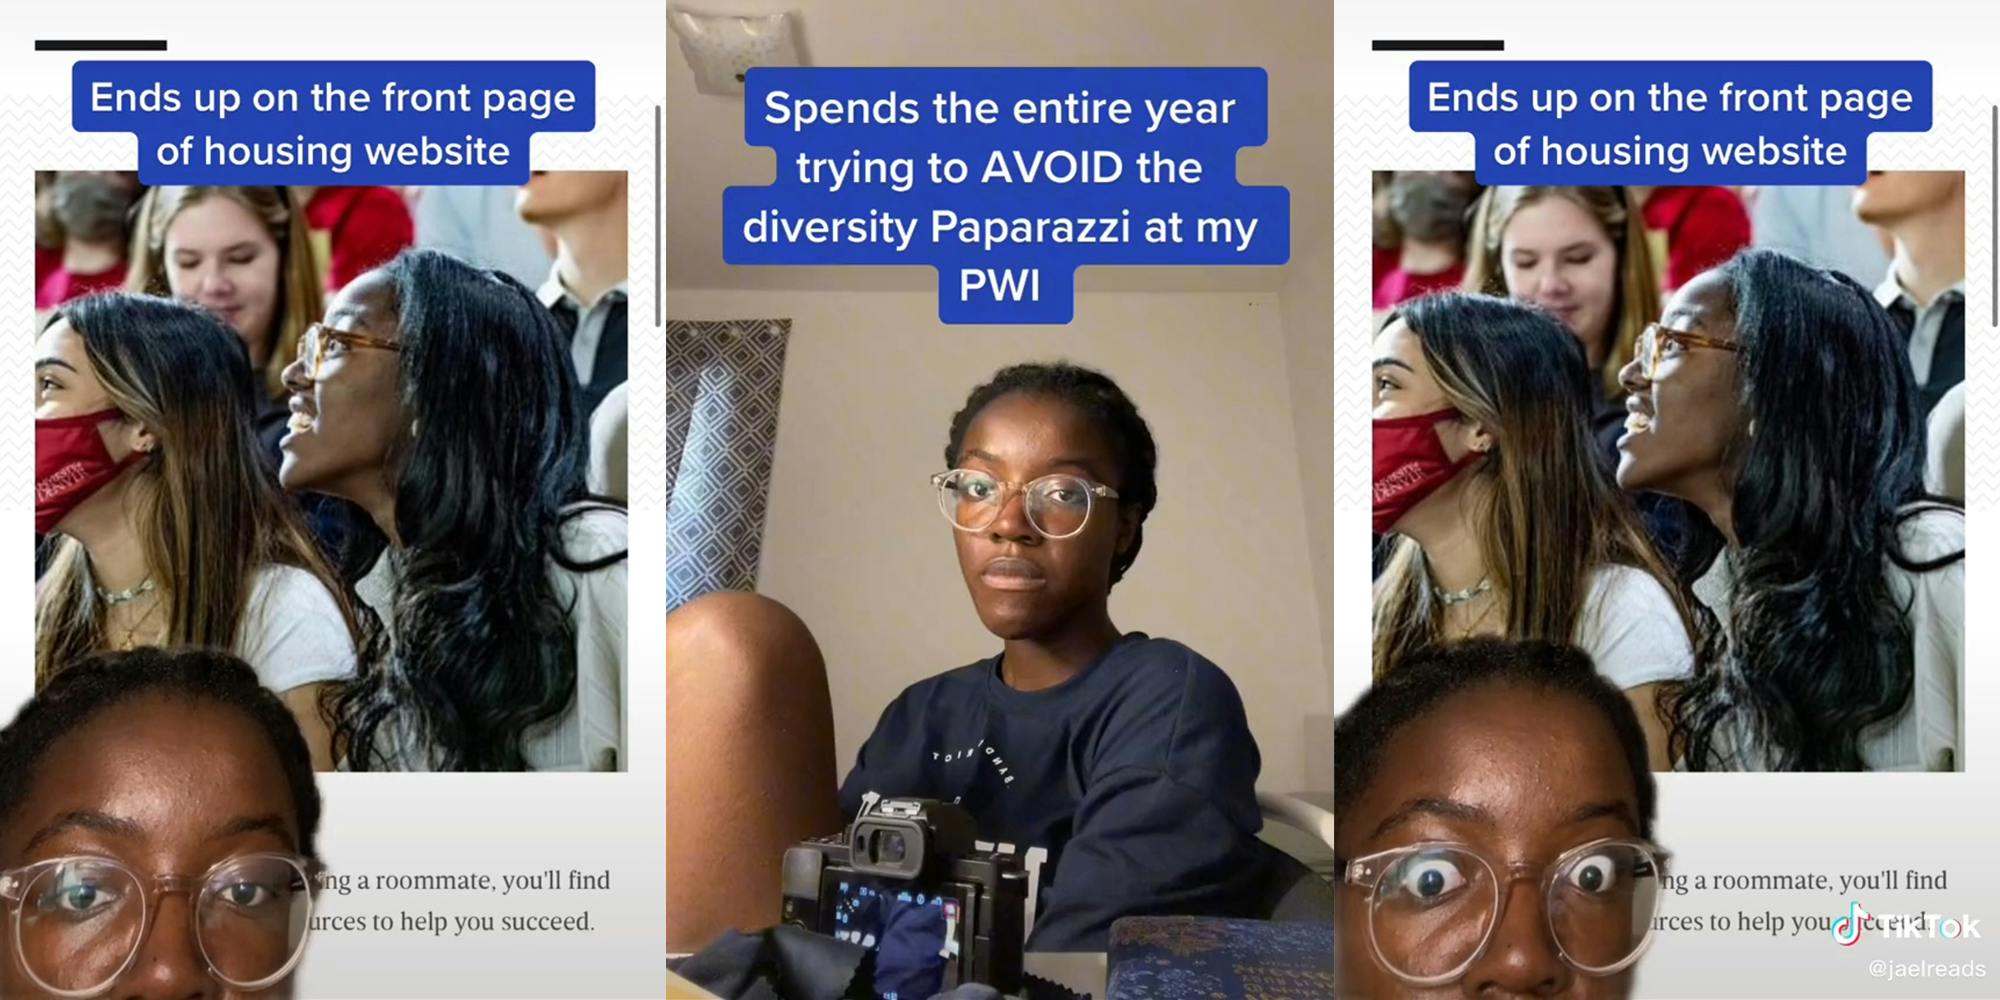 young woman with inset picture of herself in crowd with caption "Ends up on the front page of housing website" (l&r) young woman with caption "Spends the entire year trying to AVOID the diversity paparazzi at my PWI" (c)